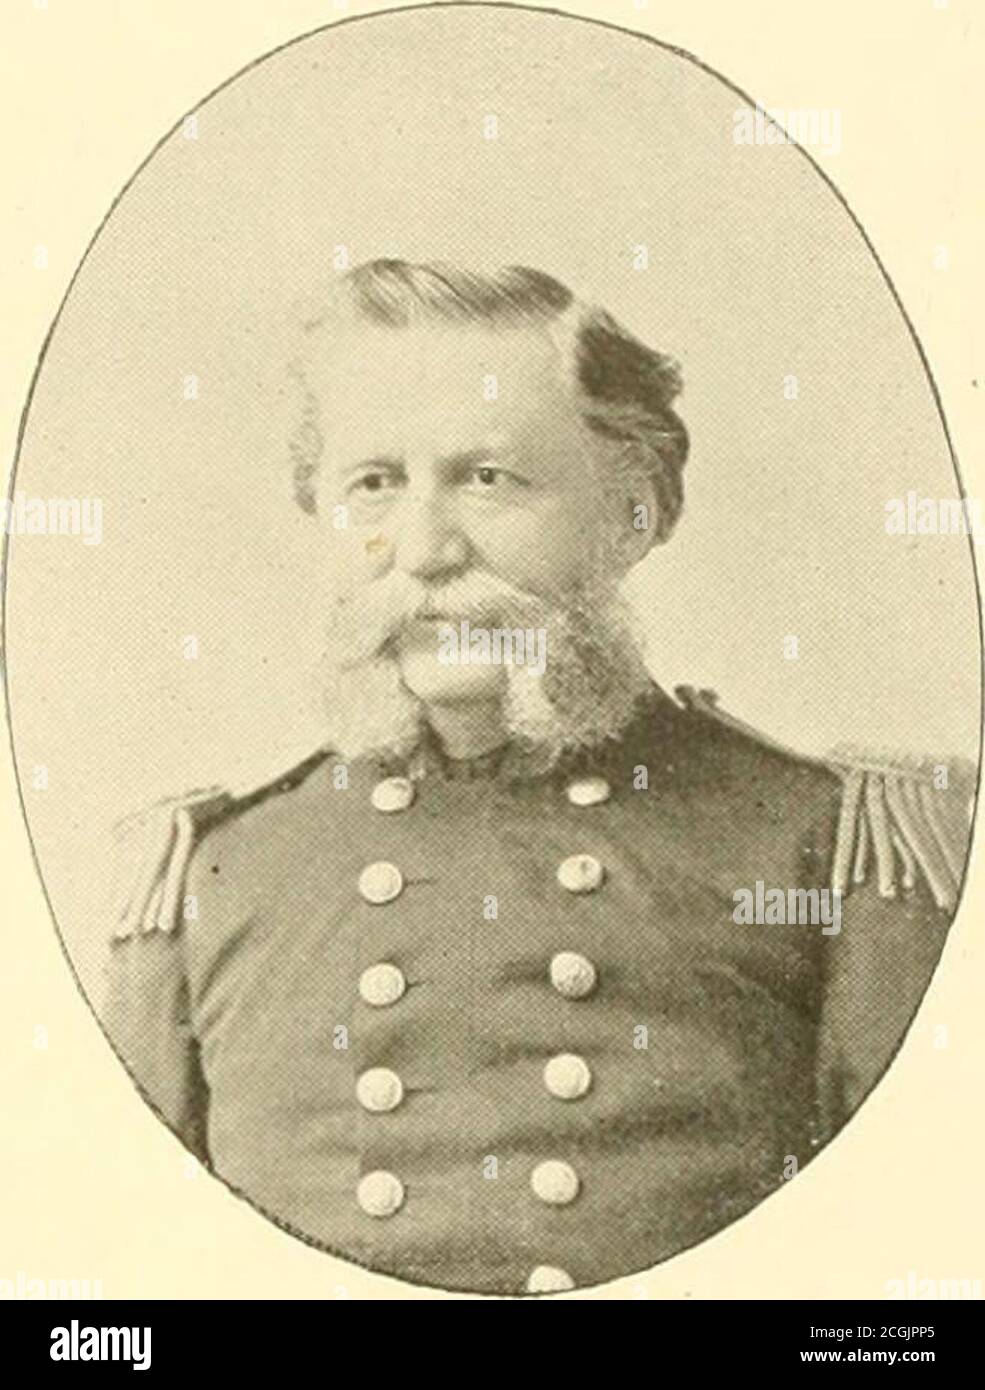 . Officers of the army and navy (regular) who served in the Civil War . lock-ade of the Atlantic coast, and was present at the captureof Tybee Island, lie was then ordered to the Colo-rado, and was at the mouth of the Mississippi duringthe operations in that river leading to the capture f NewOrleans. Paymaster Russell was next attached to theiron-clad steamer New Ironsides, on special service in1862, and in the South Atlantic Squadron during [863-64, when he was especially thanked by Commodore (after-wards Vice-Admiral) Rowan, commanding the NewIronsides, in his official despatches, for gre.it Stock Photo